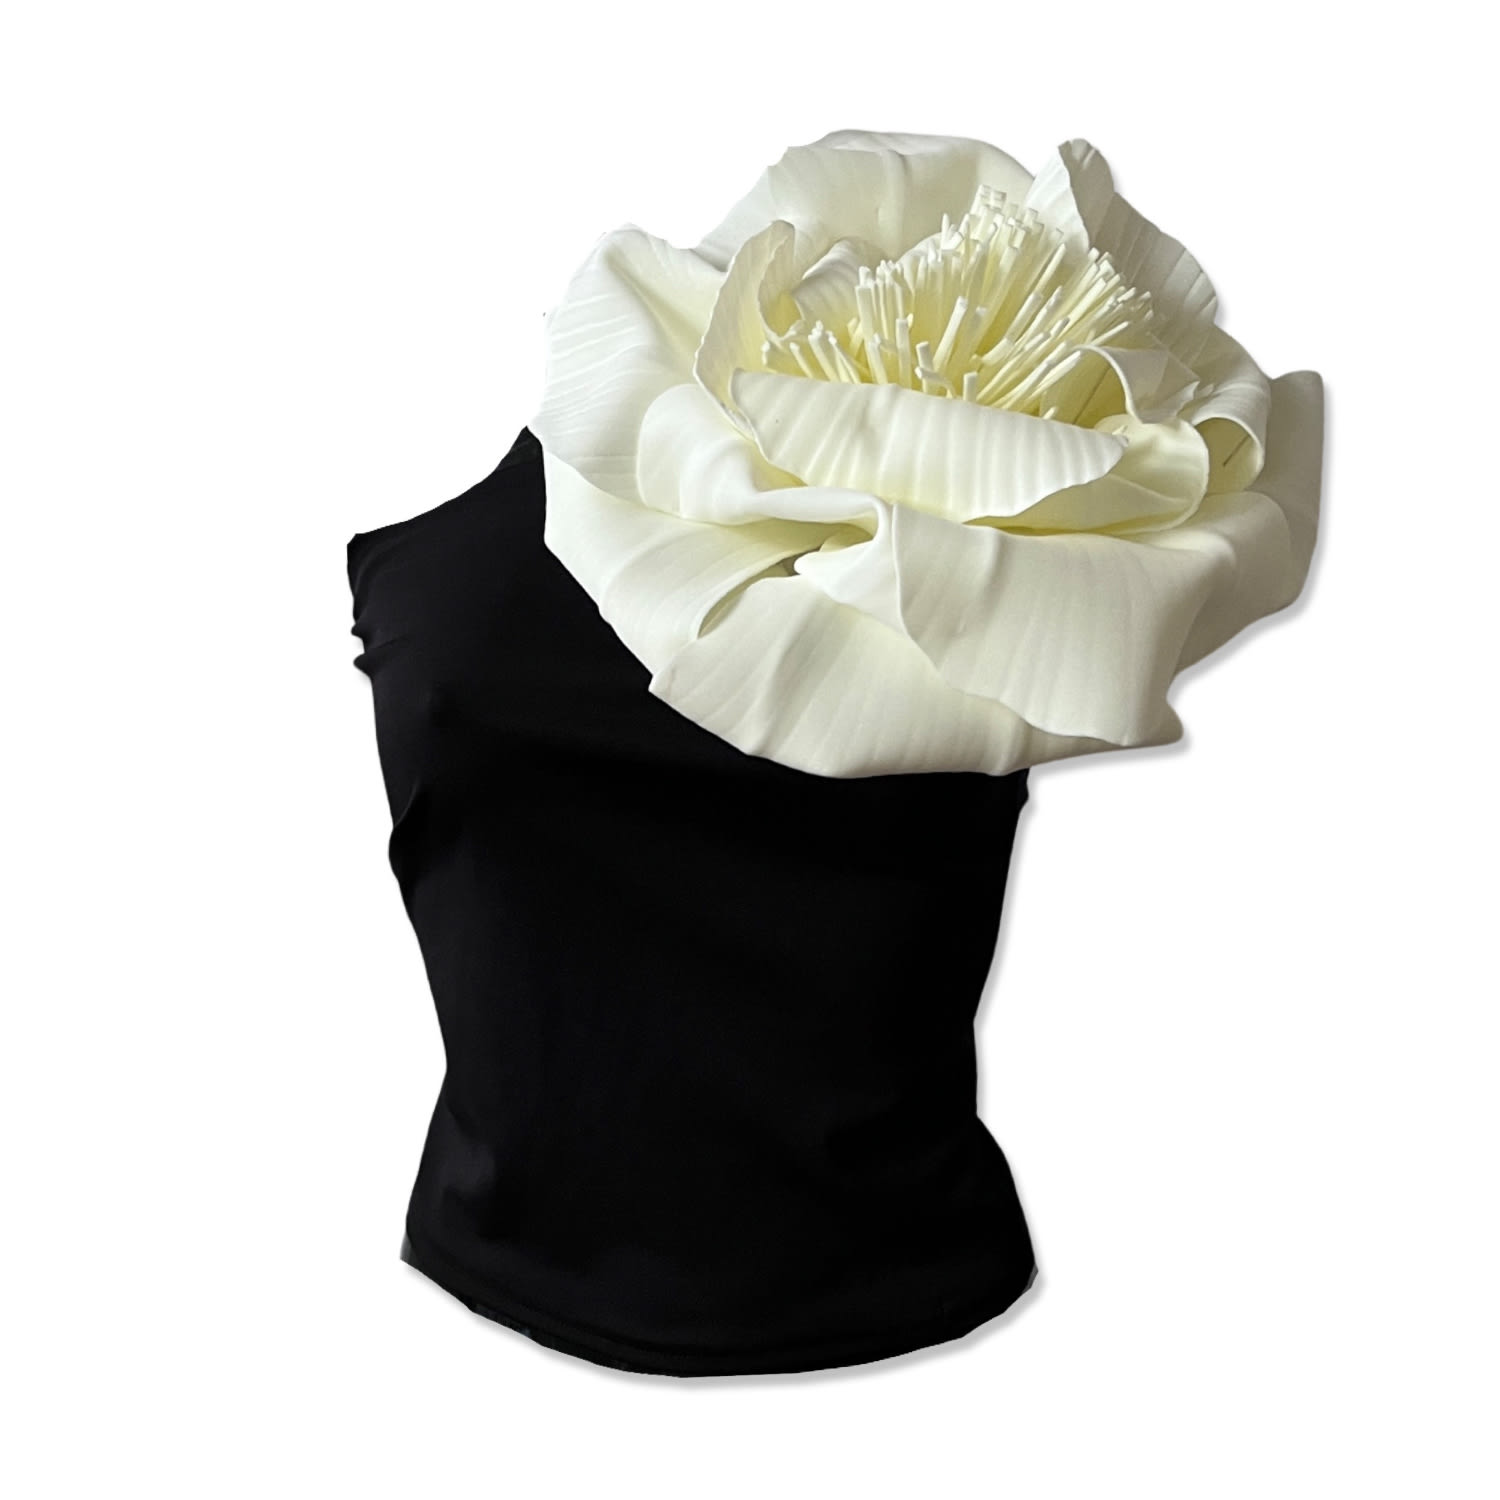 Women’s Black / White Black One Shoulder Top With White Flower Pin Medium London Atelier Byproduct